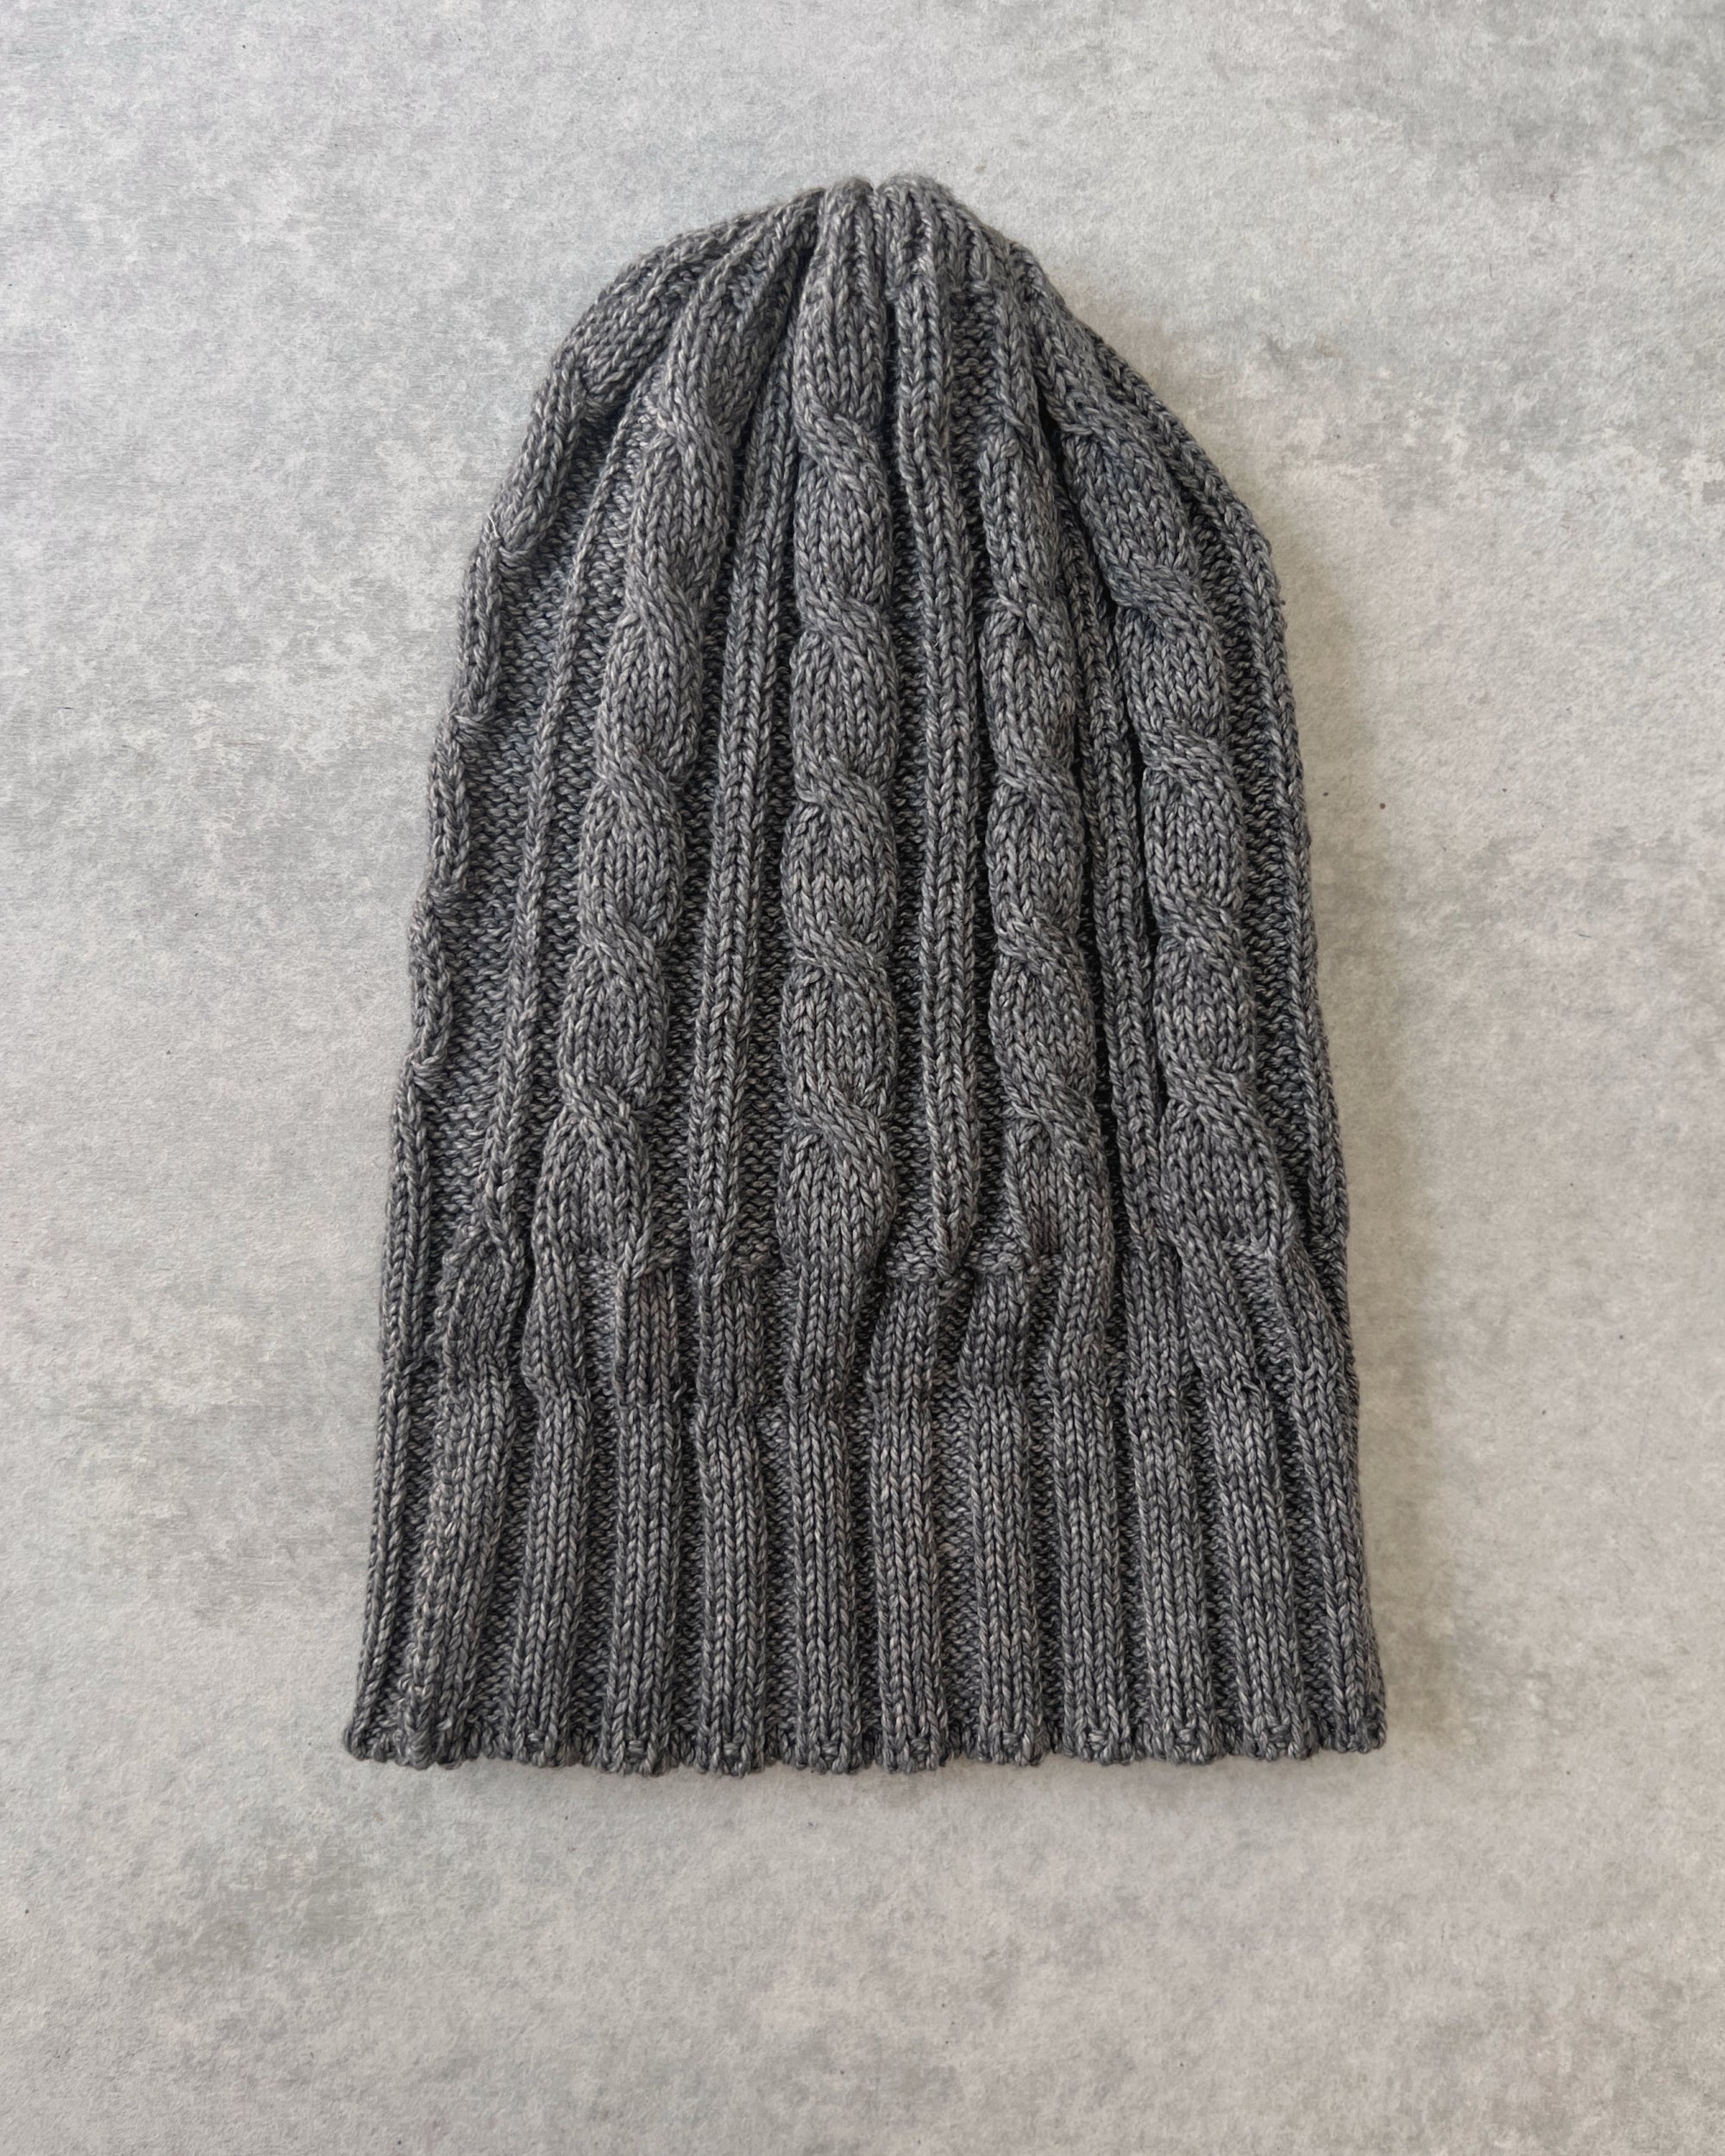 Japanese cotton cable knit beanie